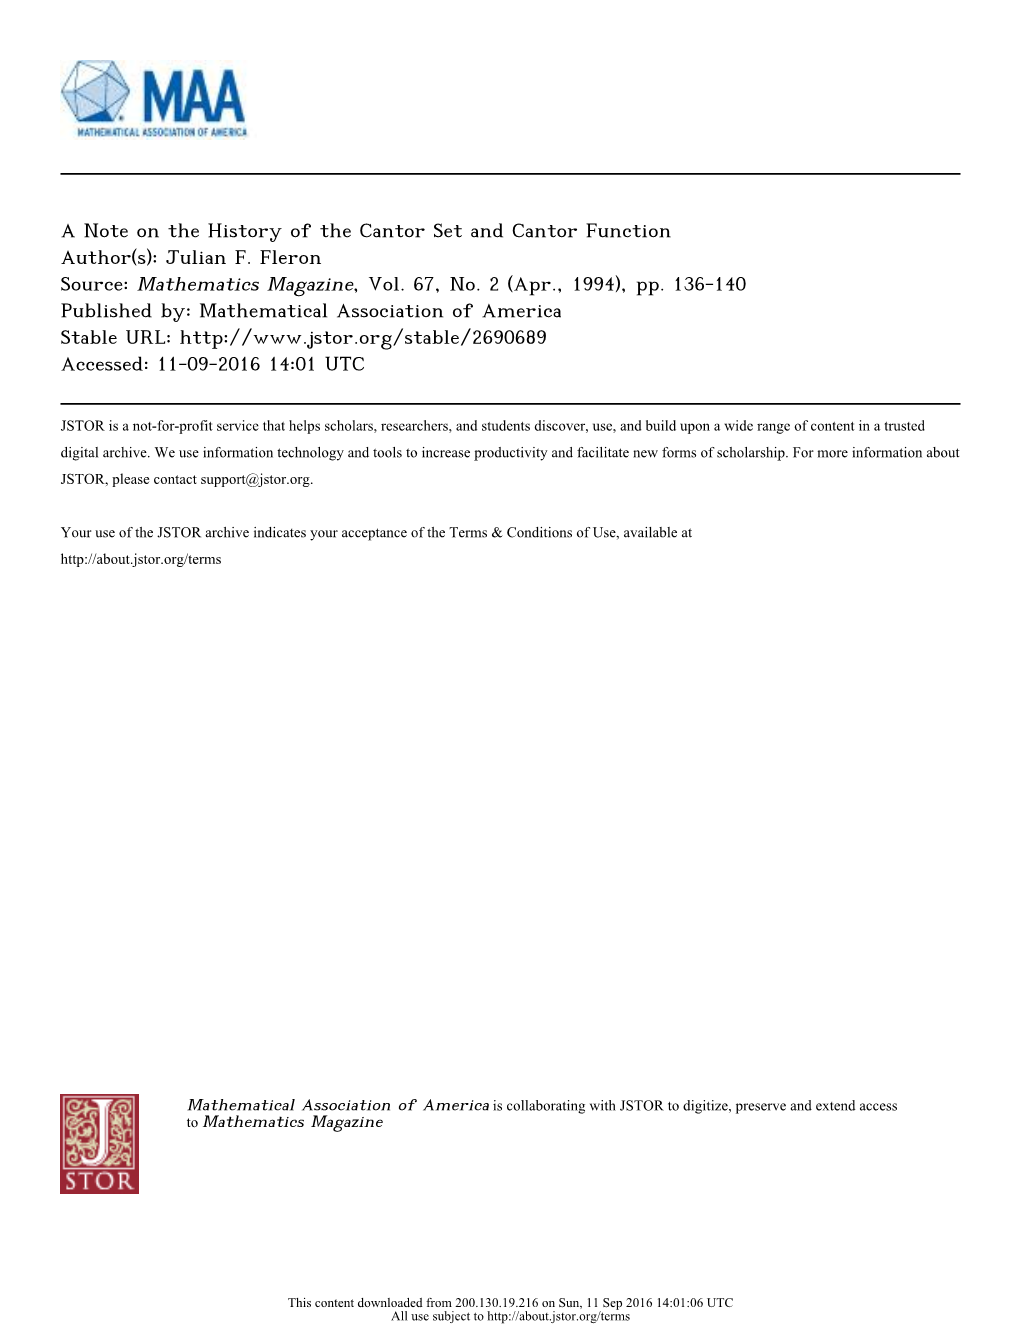 A Note on the History of the Cantor Set and Cantor Function Author(S): Julian F